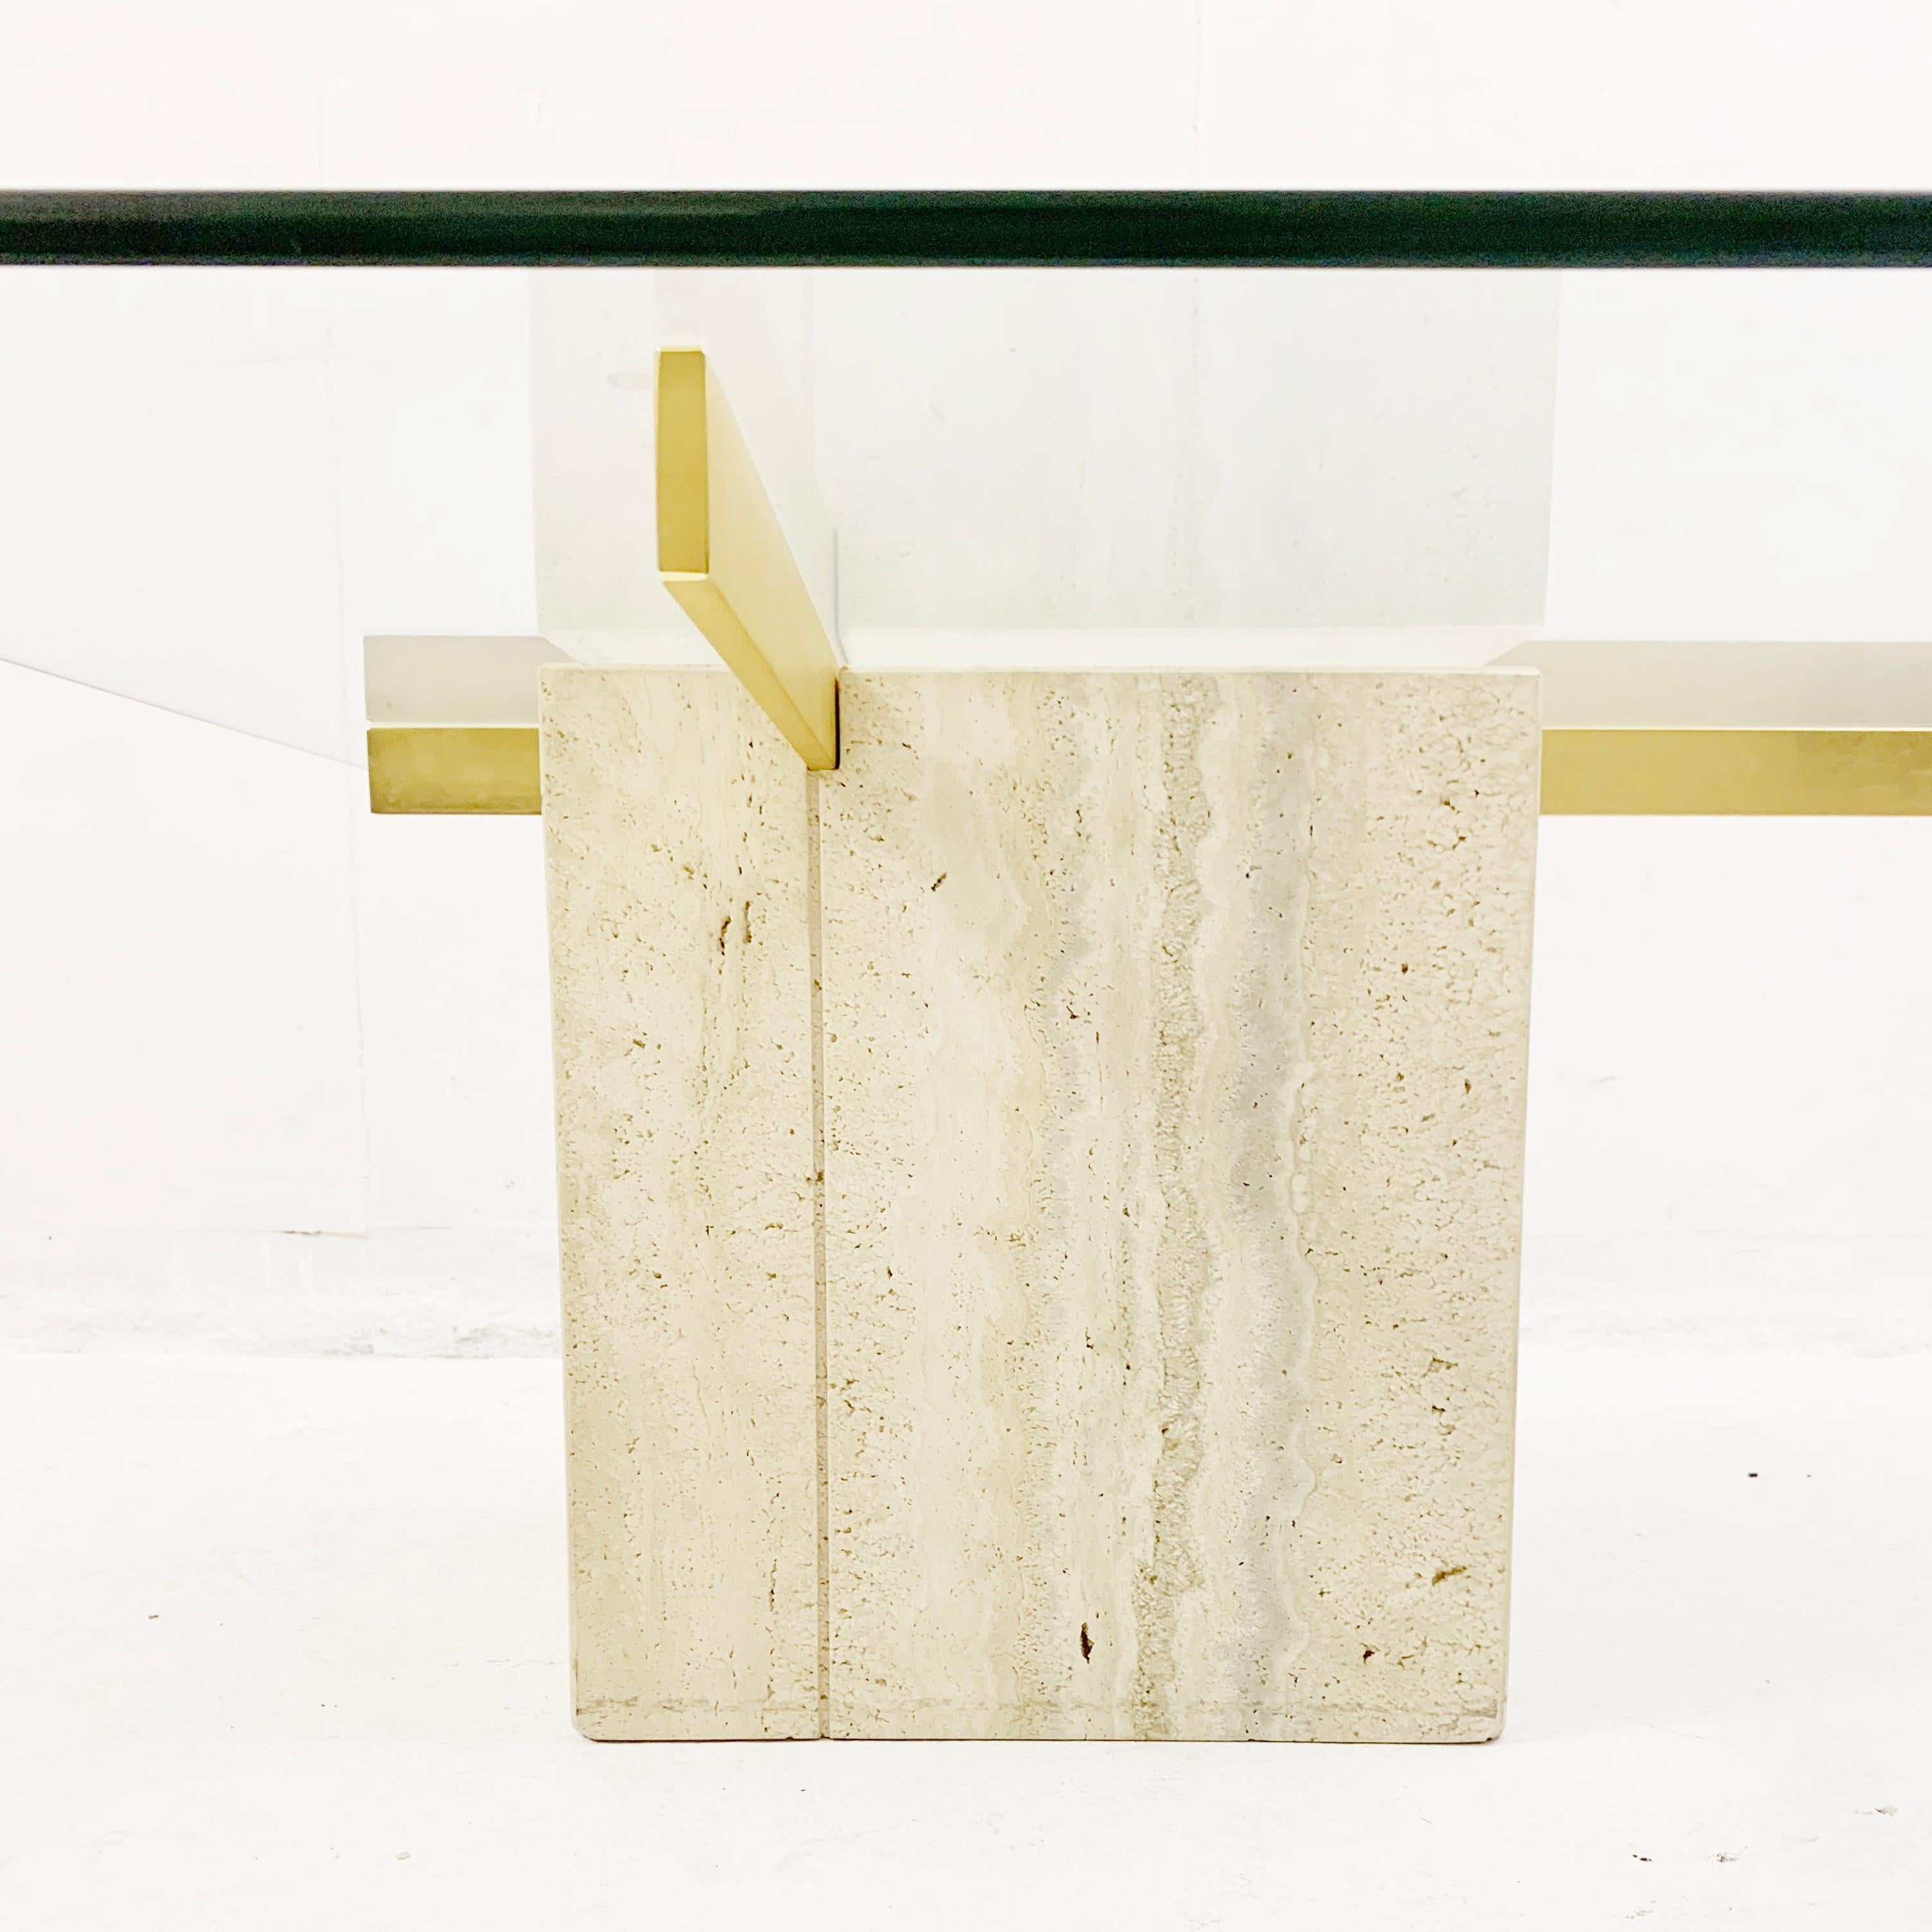 Mid-century square travertine and glass coffee Table by Artedi - Italy, 1970s.